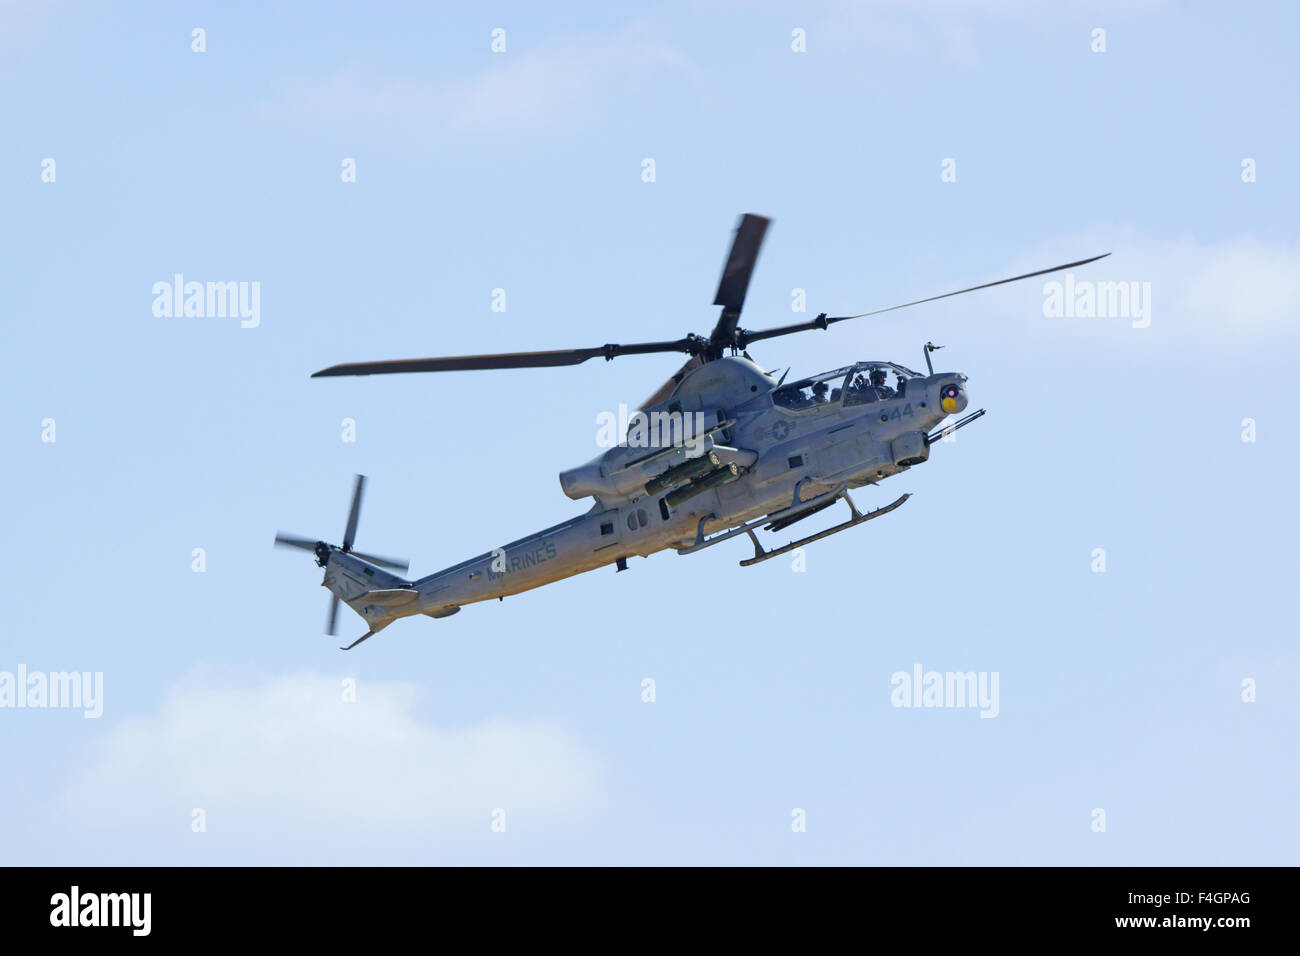 Helicopter AH-1 Super Cobra flying at the 2015 Miramar Air Show in San Diego, California Stock Photo